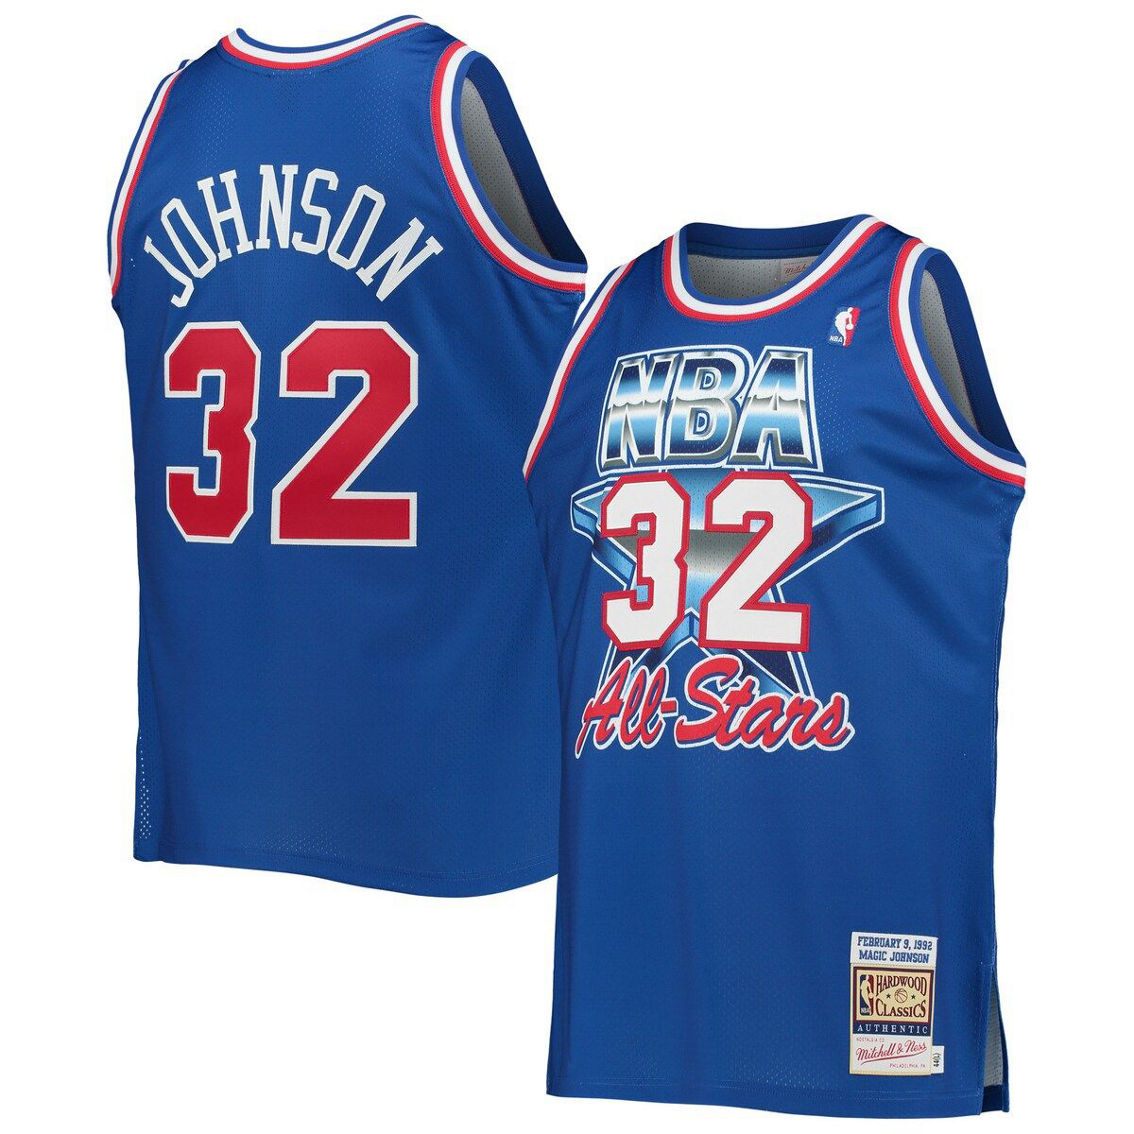 Mitchell & Ness Men's Magic Johnson Royal Western Conference Hardwood Classics 1992 NBA All-Star Game Authentic Jersey - Image 2 of 4